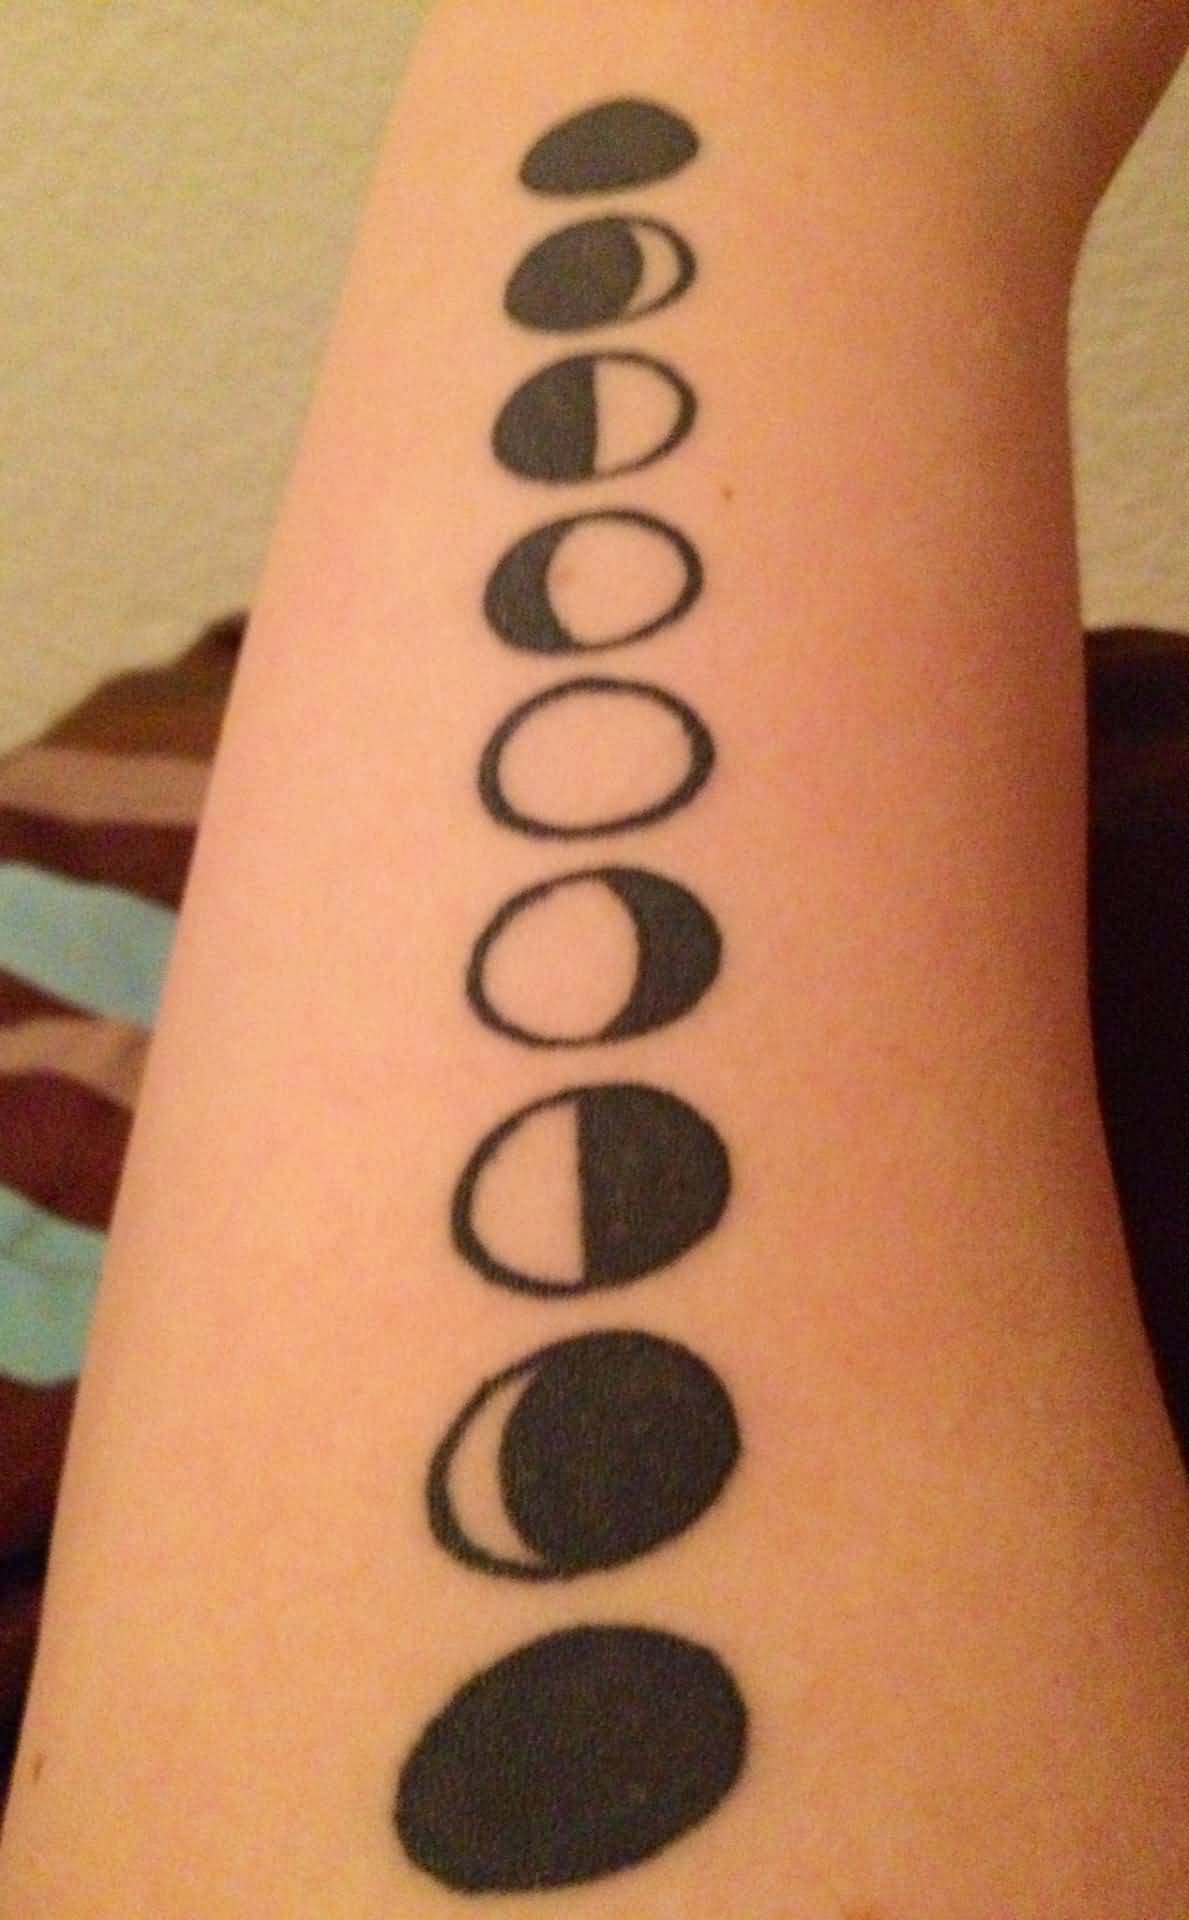 Black Phases Of The Moon Tattoo Design For Forearm